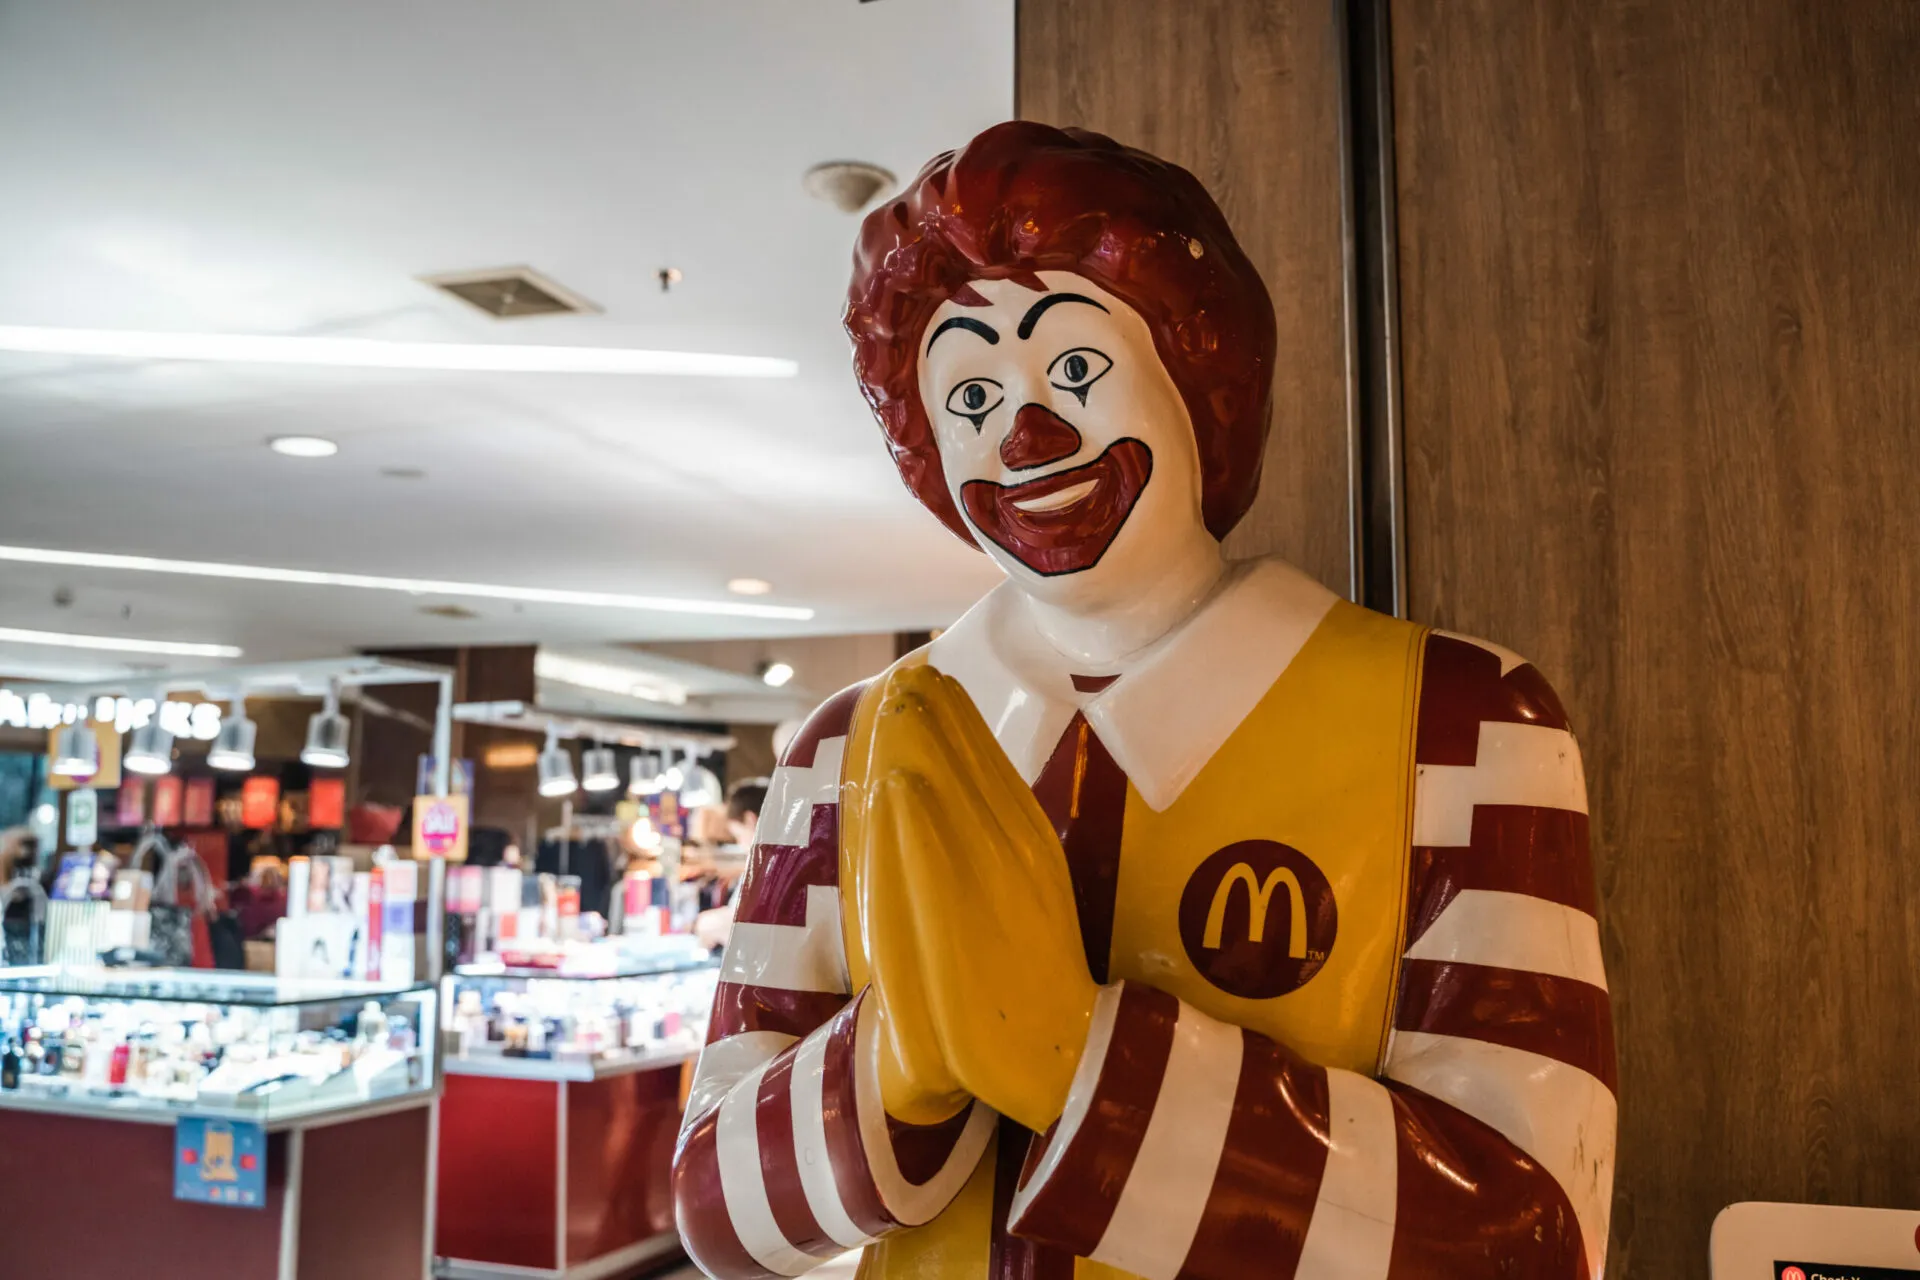 A ronald mcdonald statue in an indoor mall.